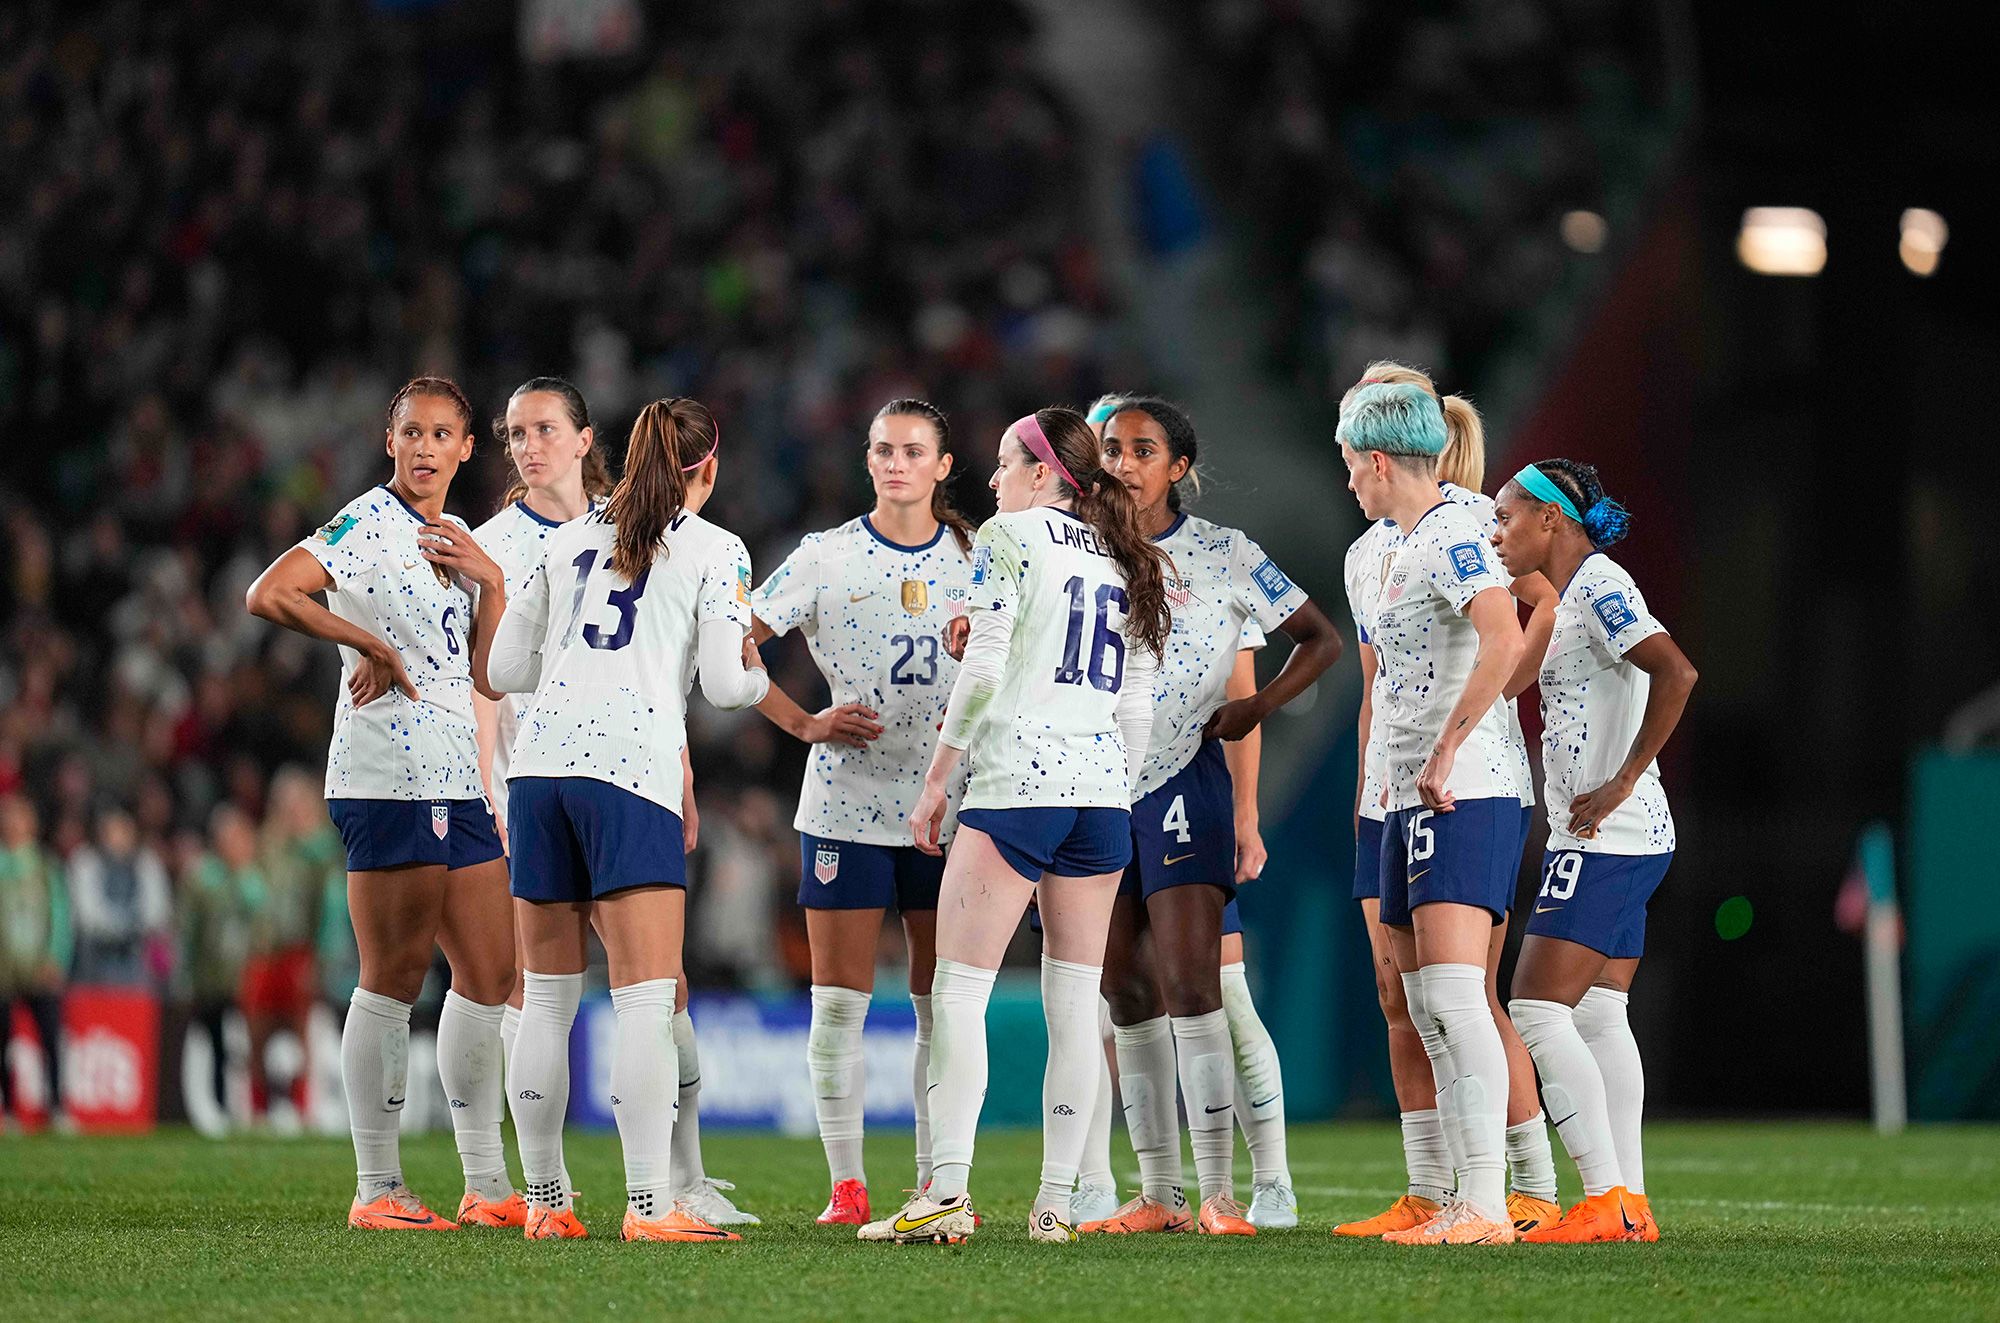 Norton Rose Partner Watches Daughter Compete in FIFA Women's World Cup